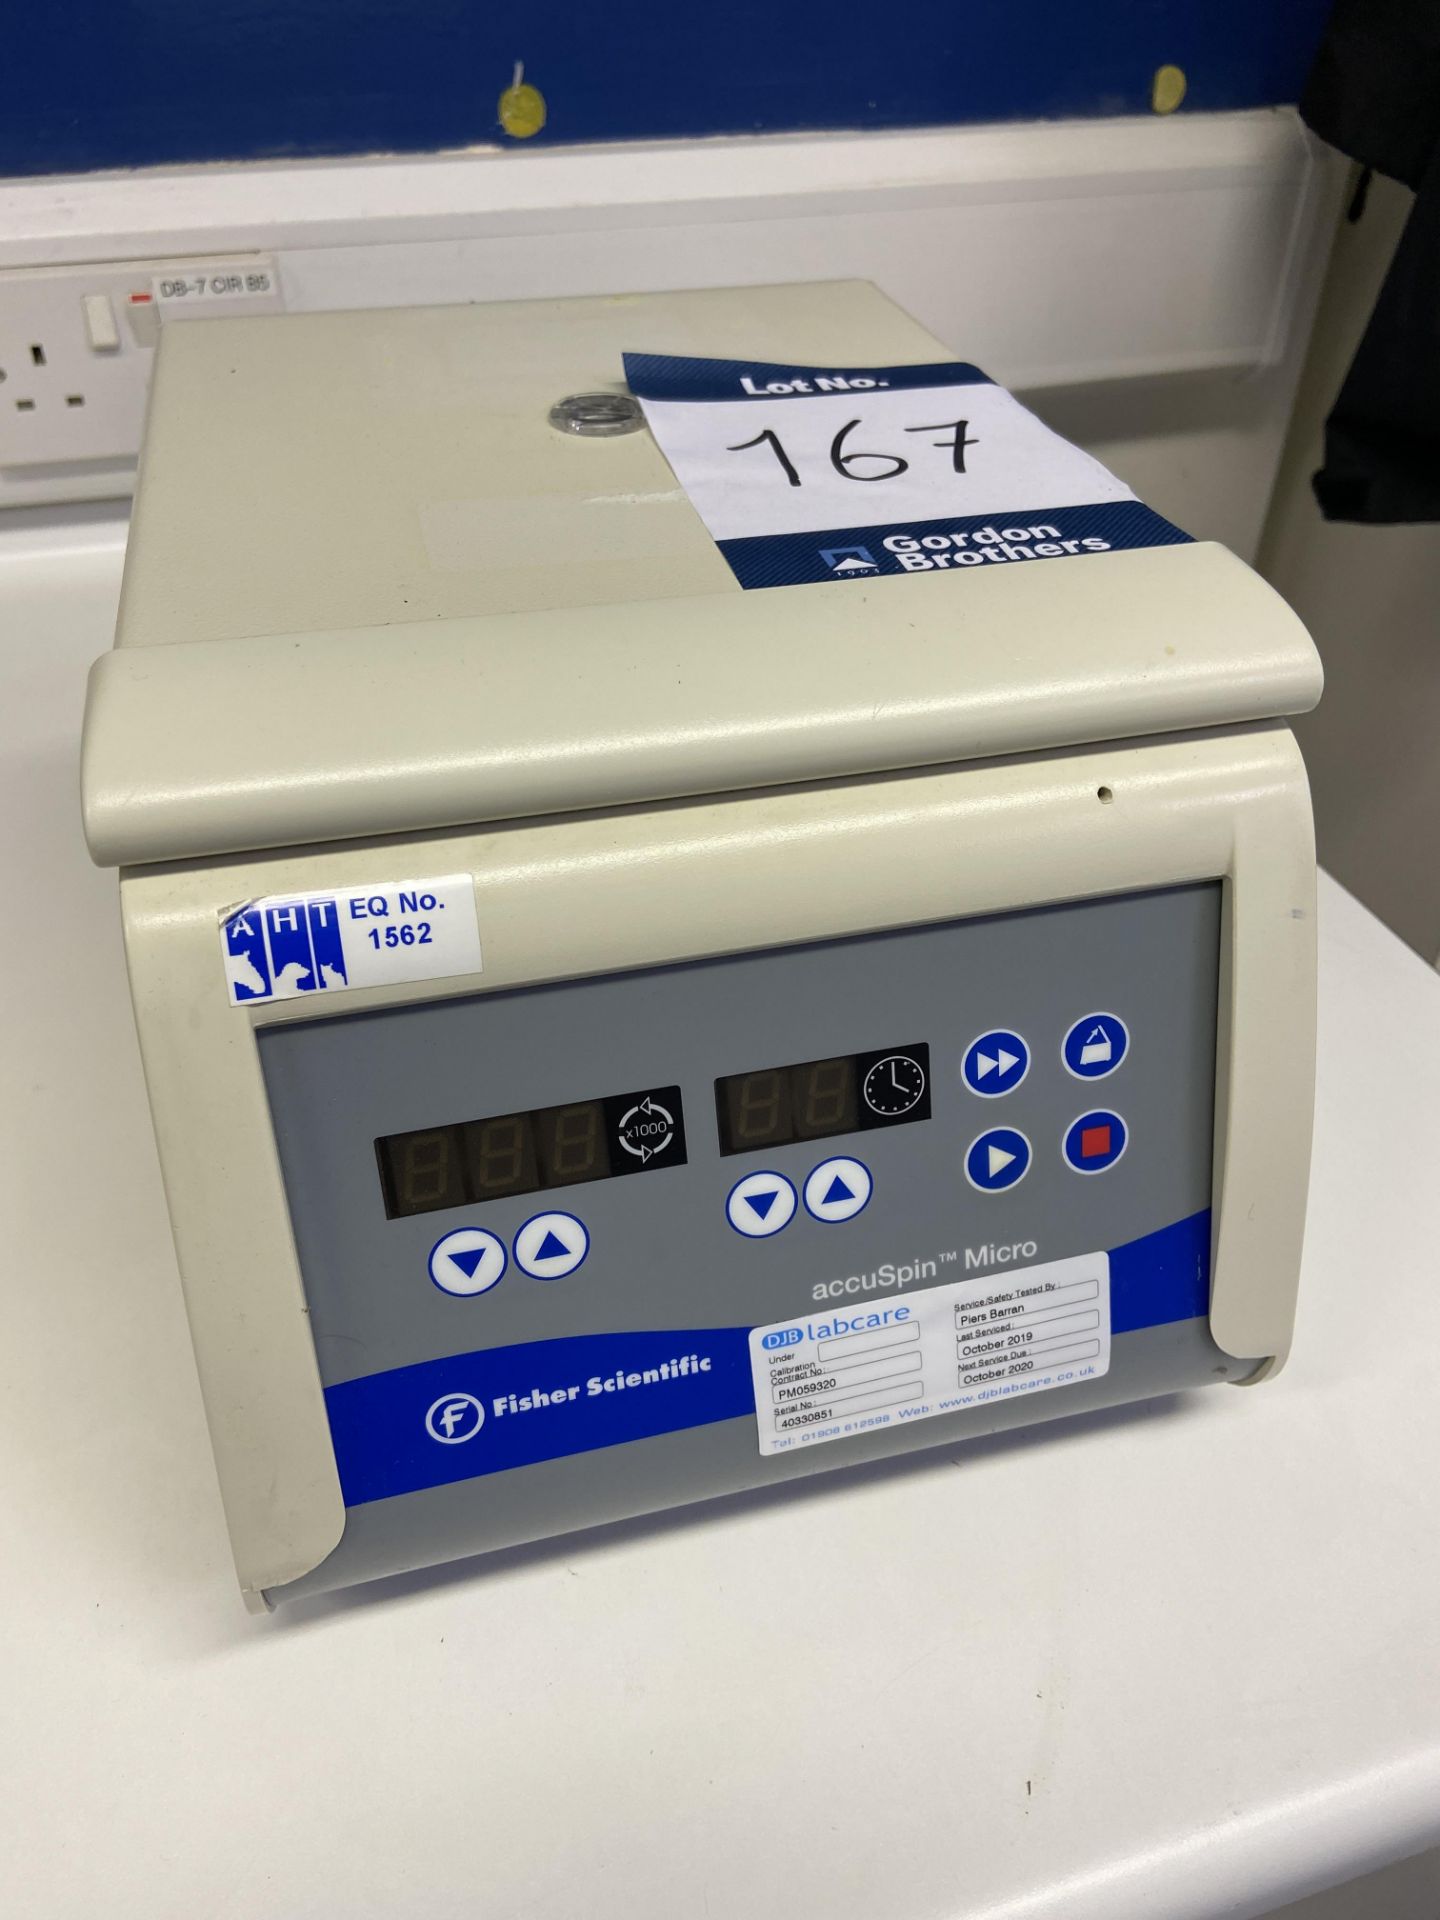 Fisher Scientific Accuspin Micro benchtop centrifuge, Serial No. 40330851 (2003), with 240v power